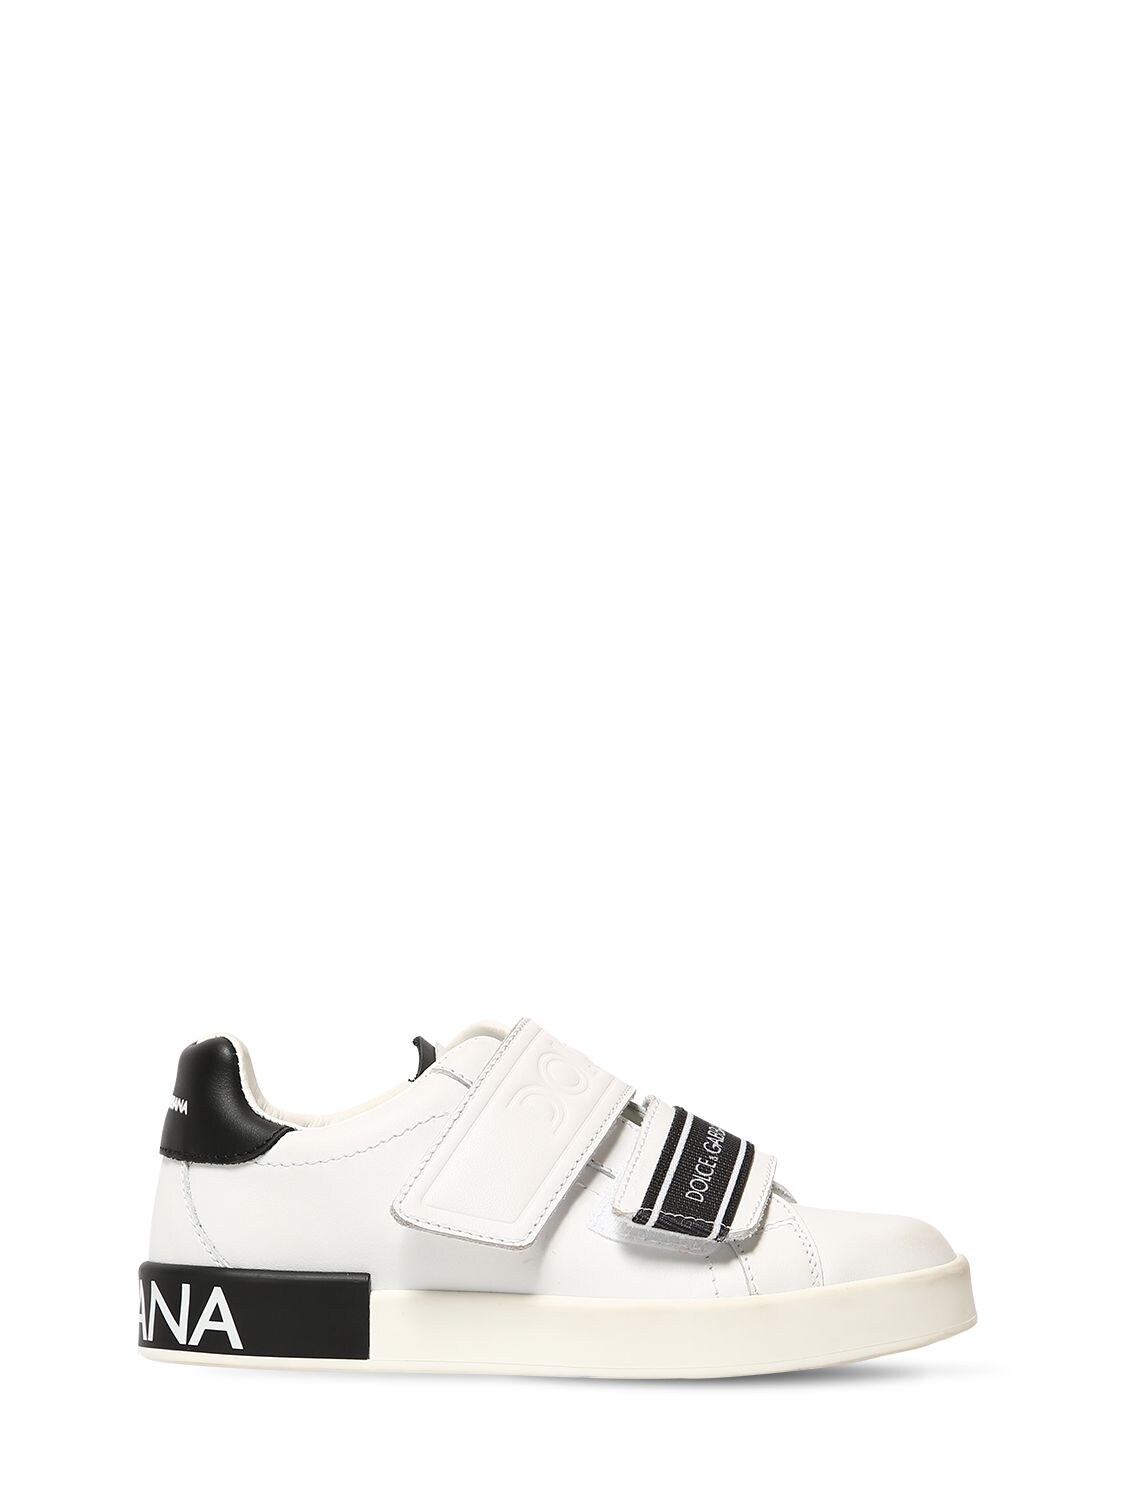 Dolce & Gabbana Kids' Logo Printed Leather Strap Sneakers In White